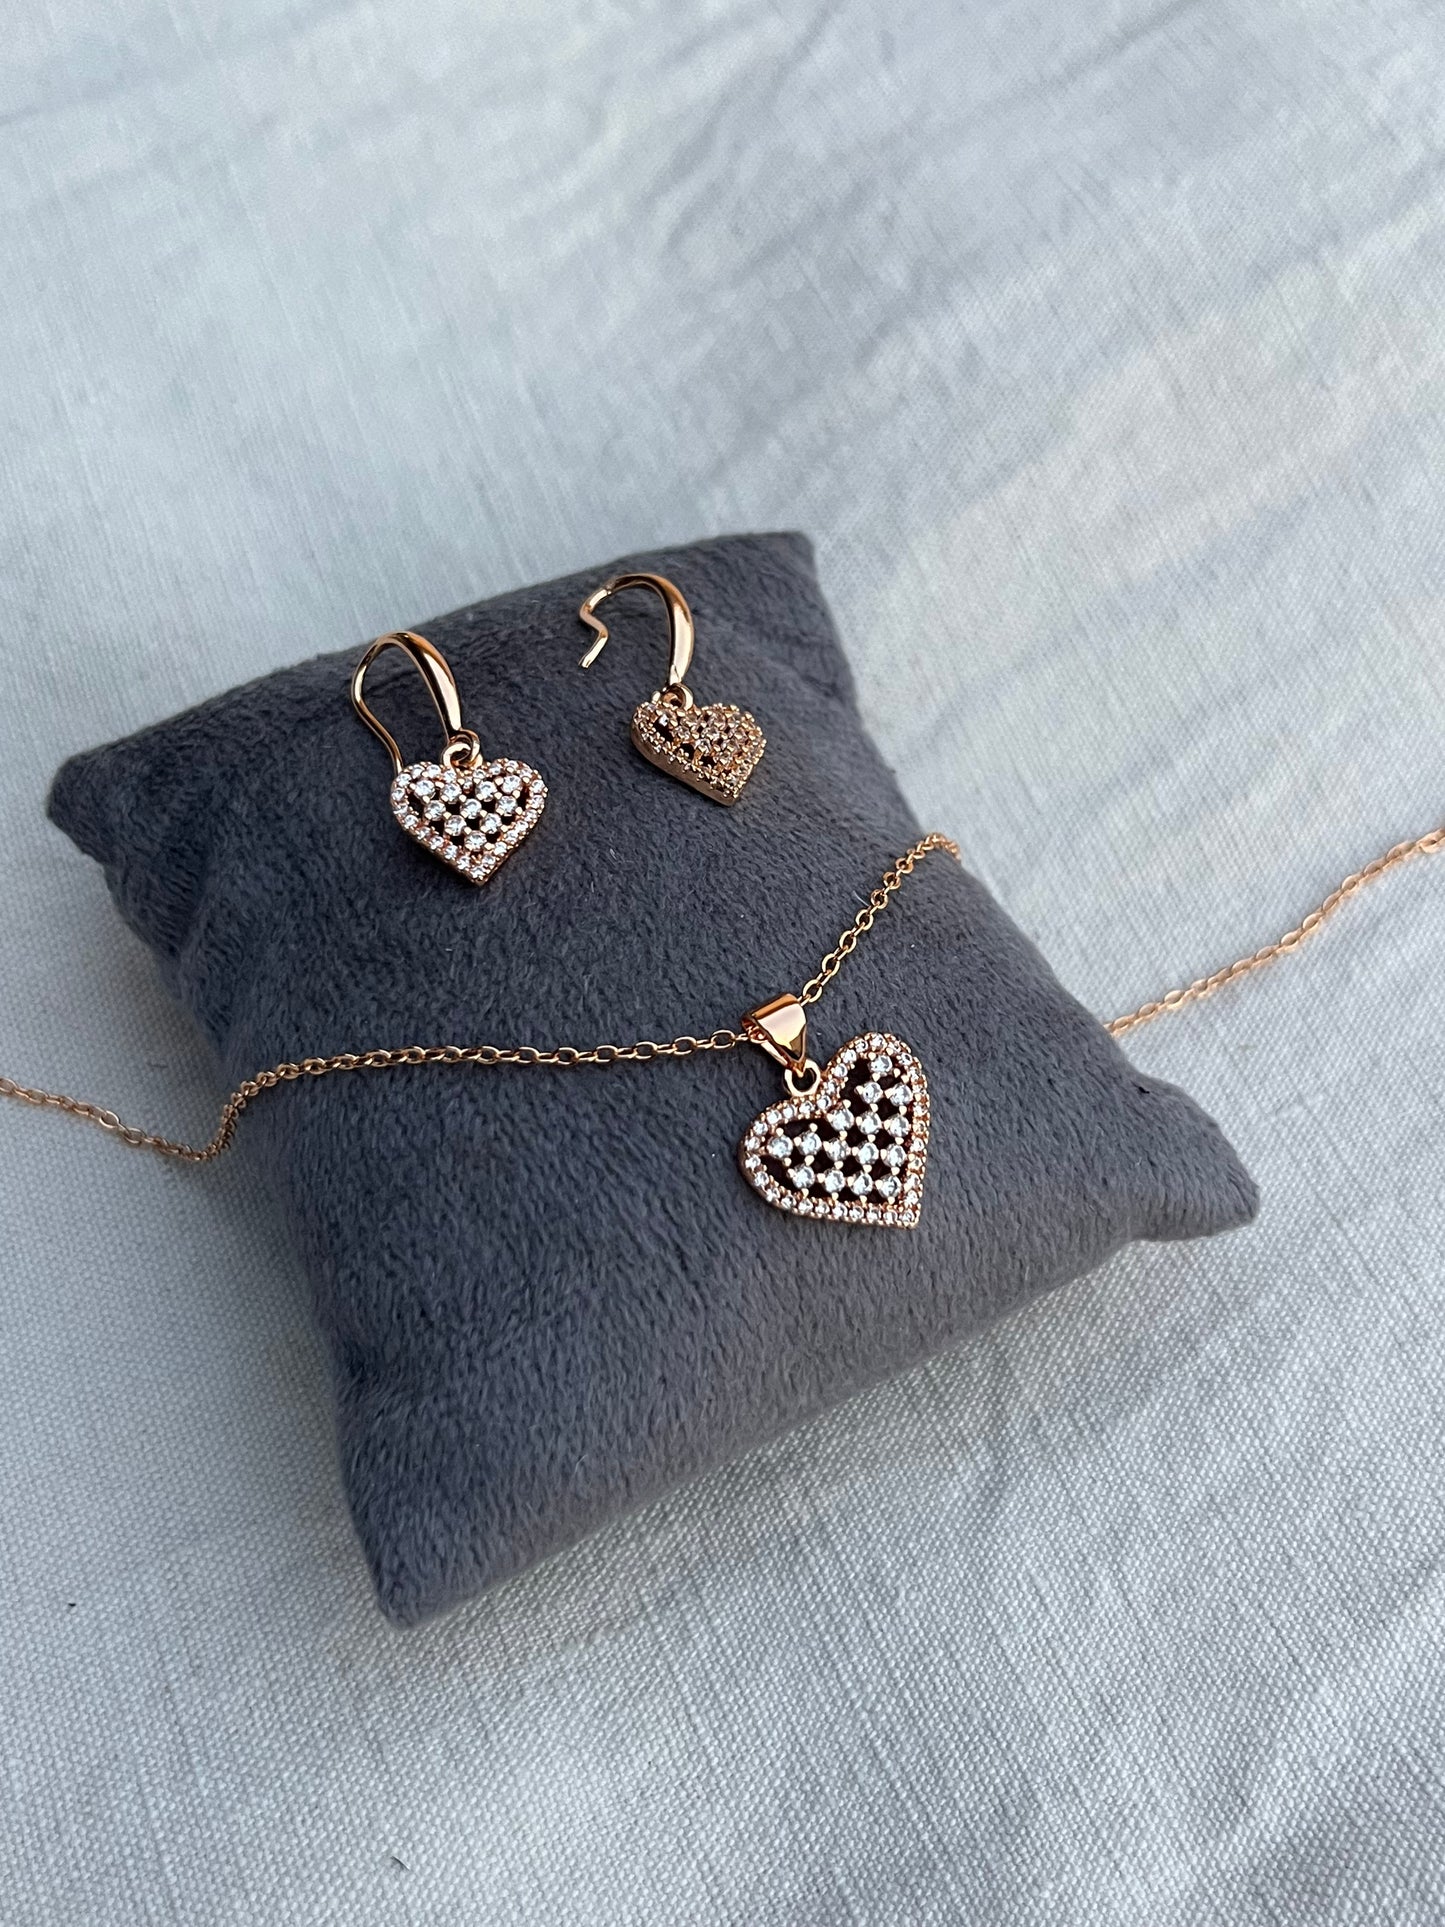 Heart Tops and Necklace set